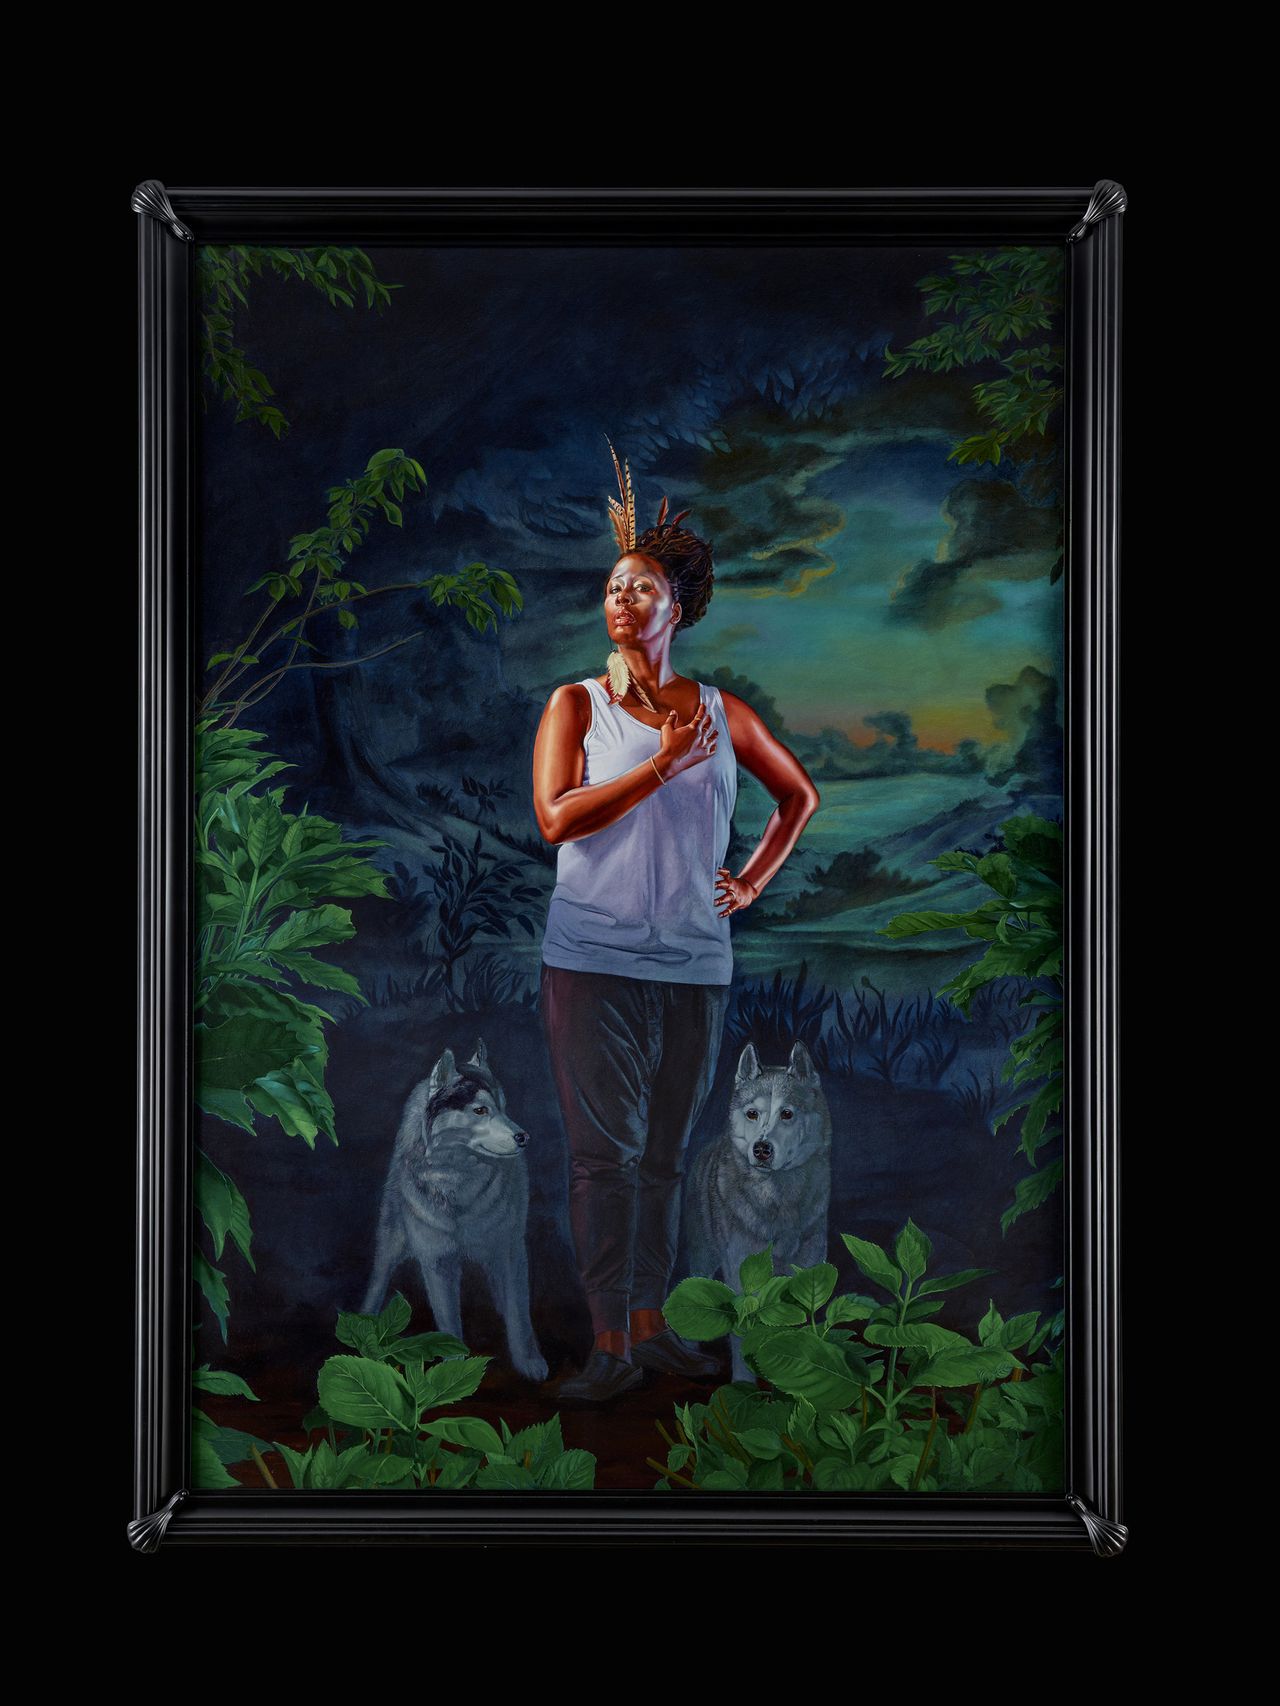 Kehinde Wiley, "Portrait of Mickalene Thomas, the Coyote," 2017, oil on canvas